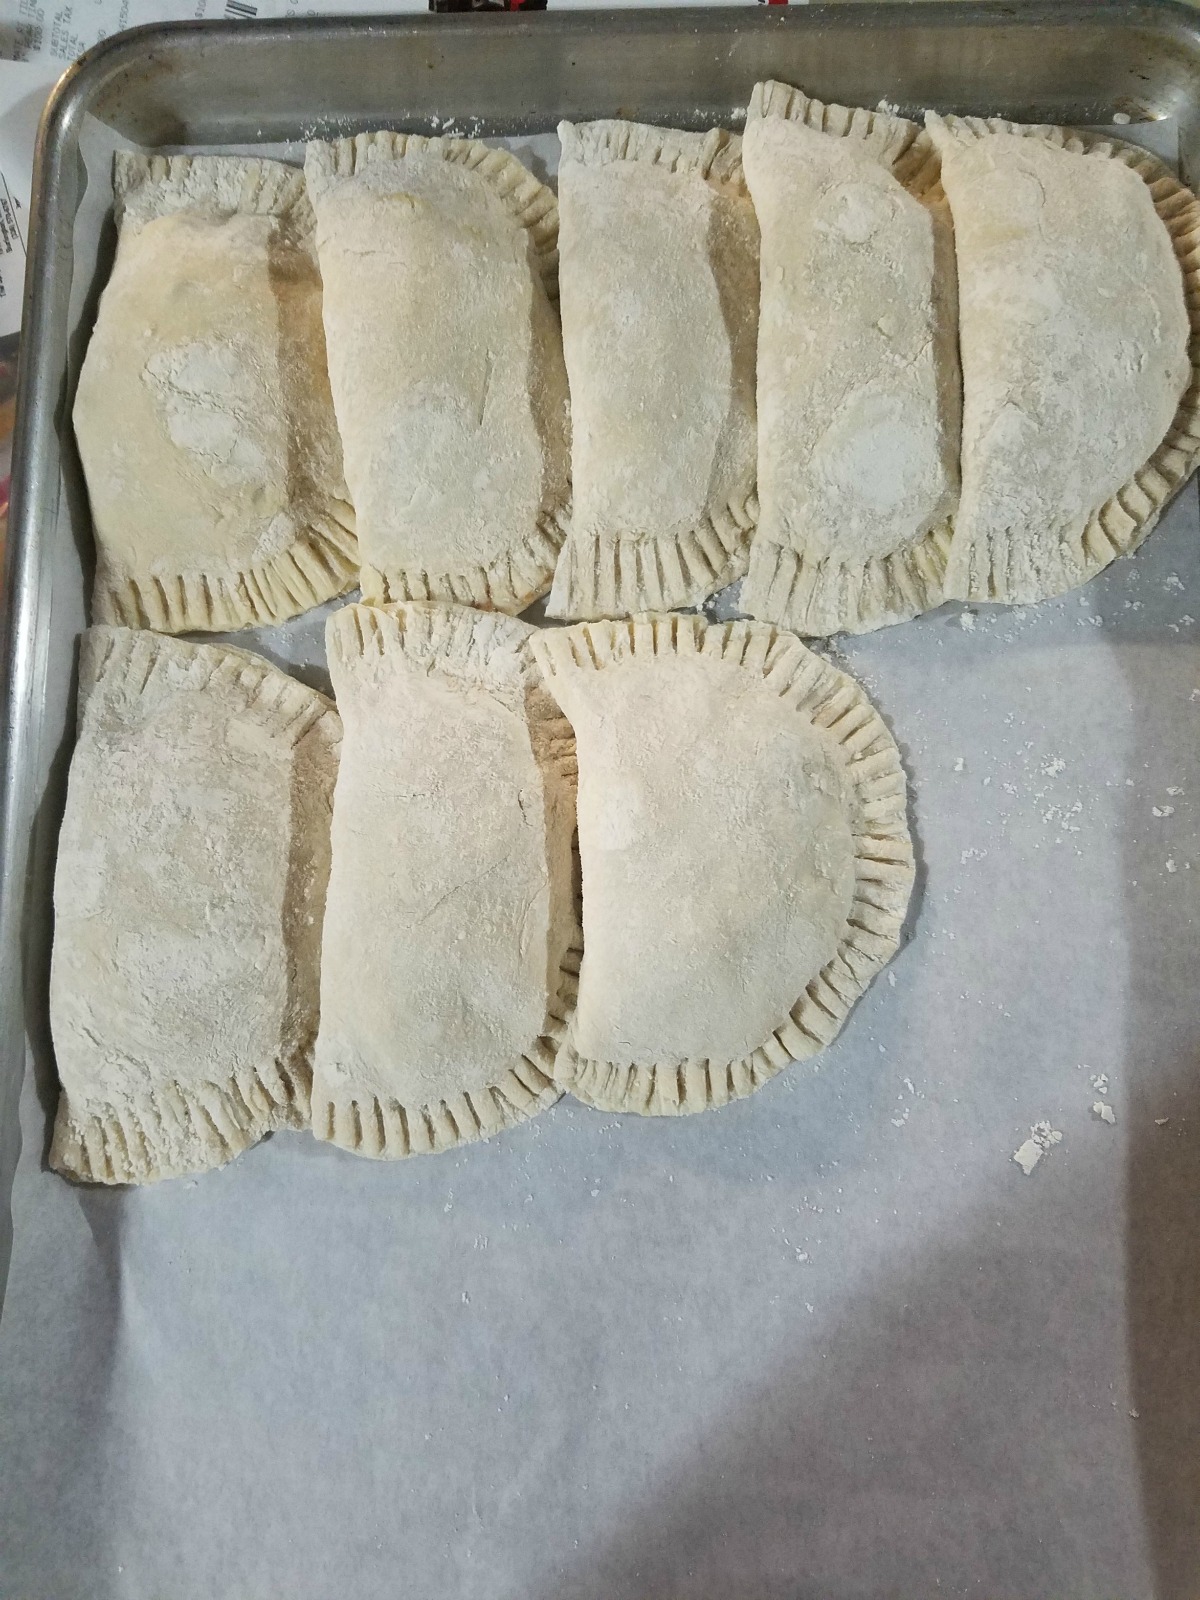 Uncooked hand pies layered on a half sheet pan.